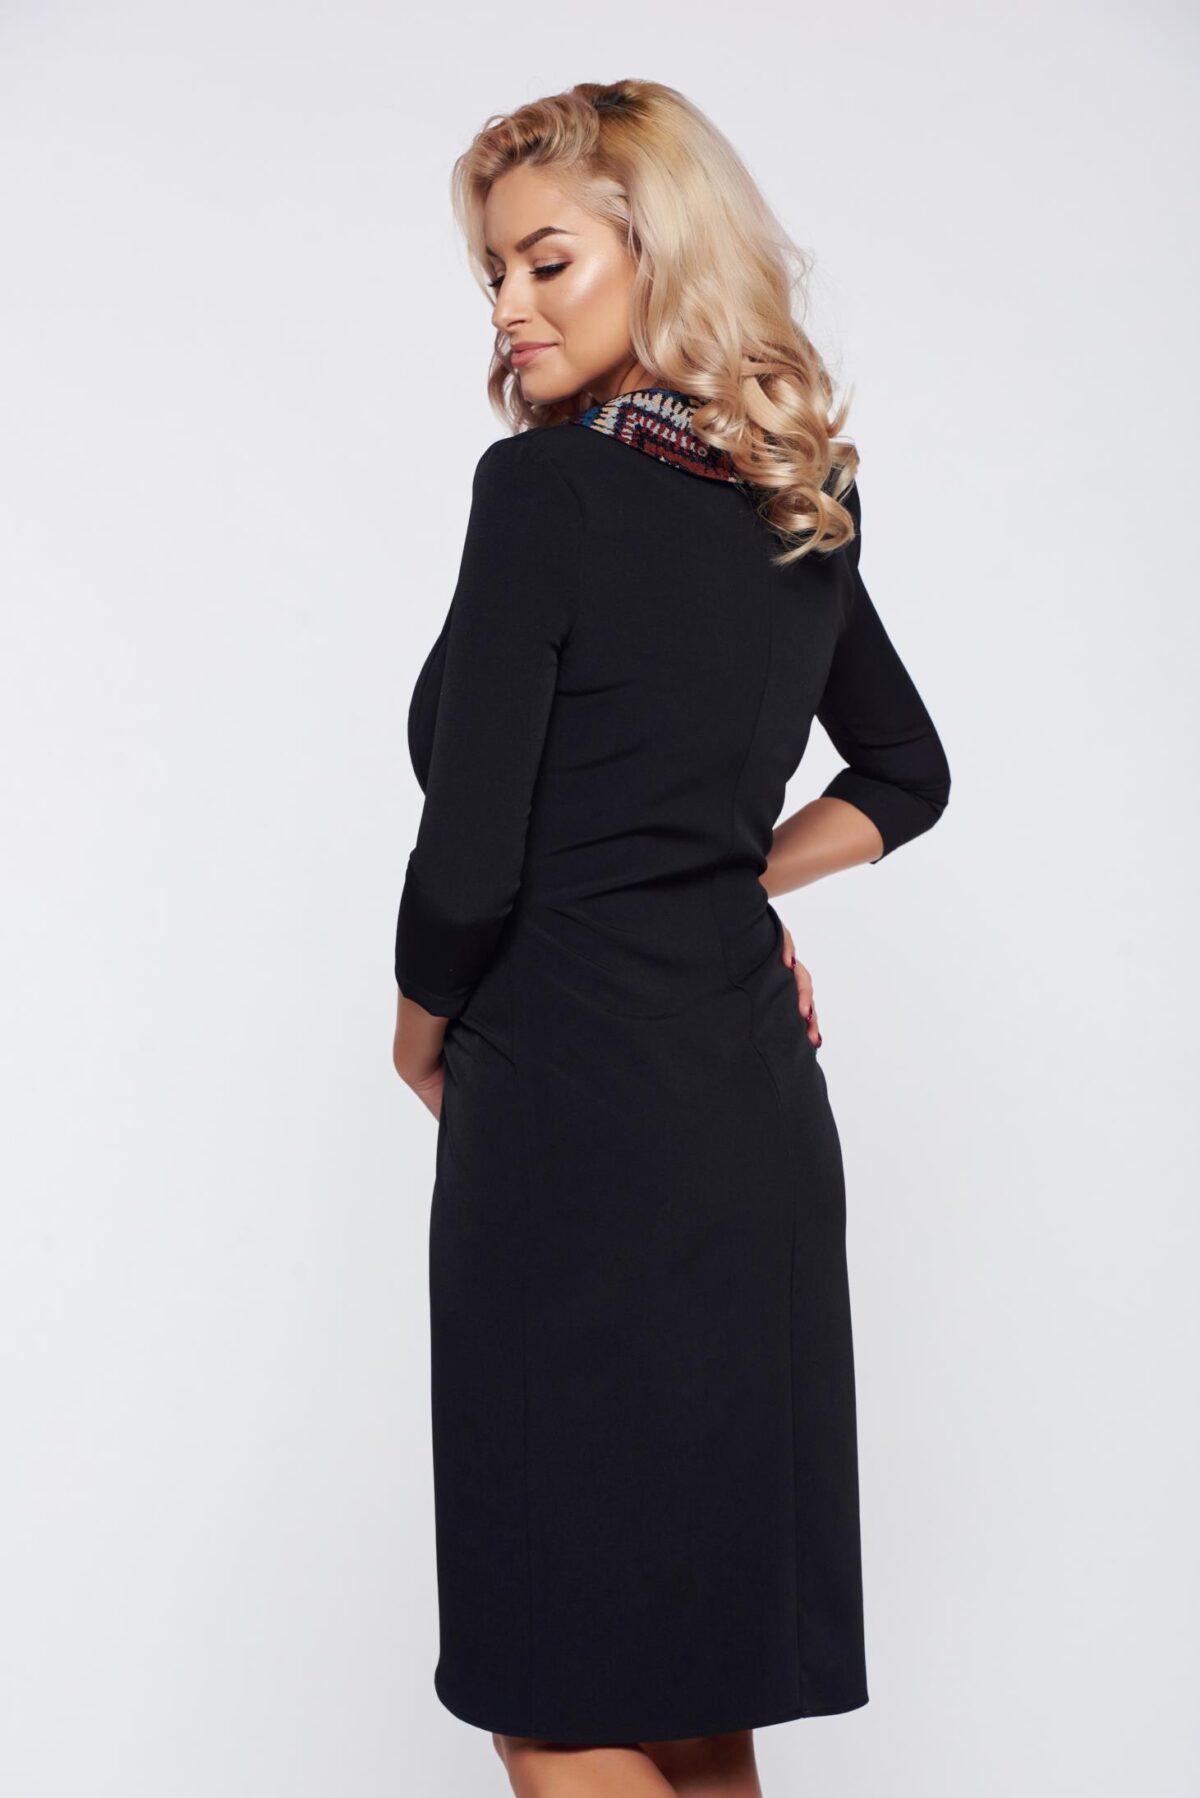 Fall In Love Elegant Daily Wrap Around Black Dress With A Cleavage